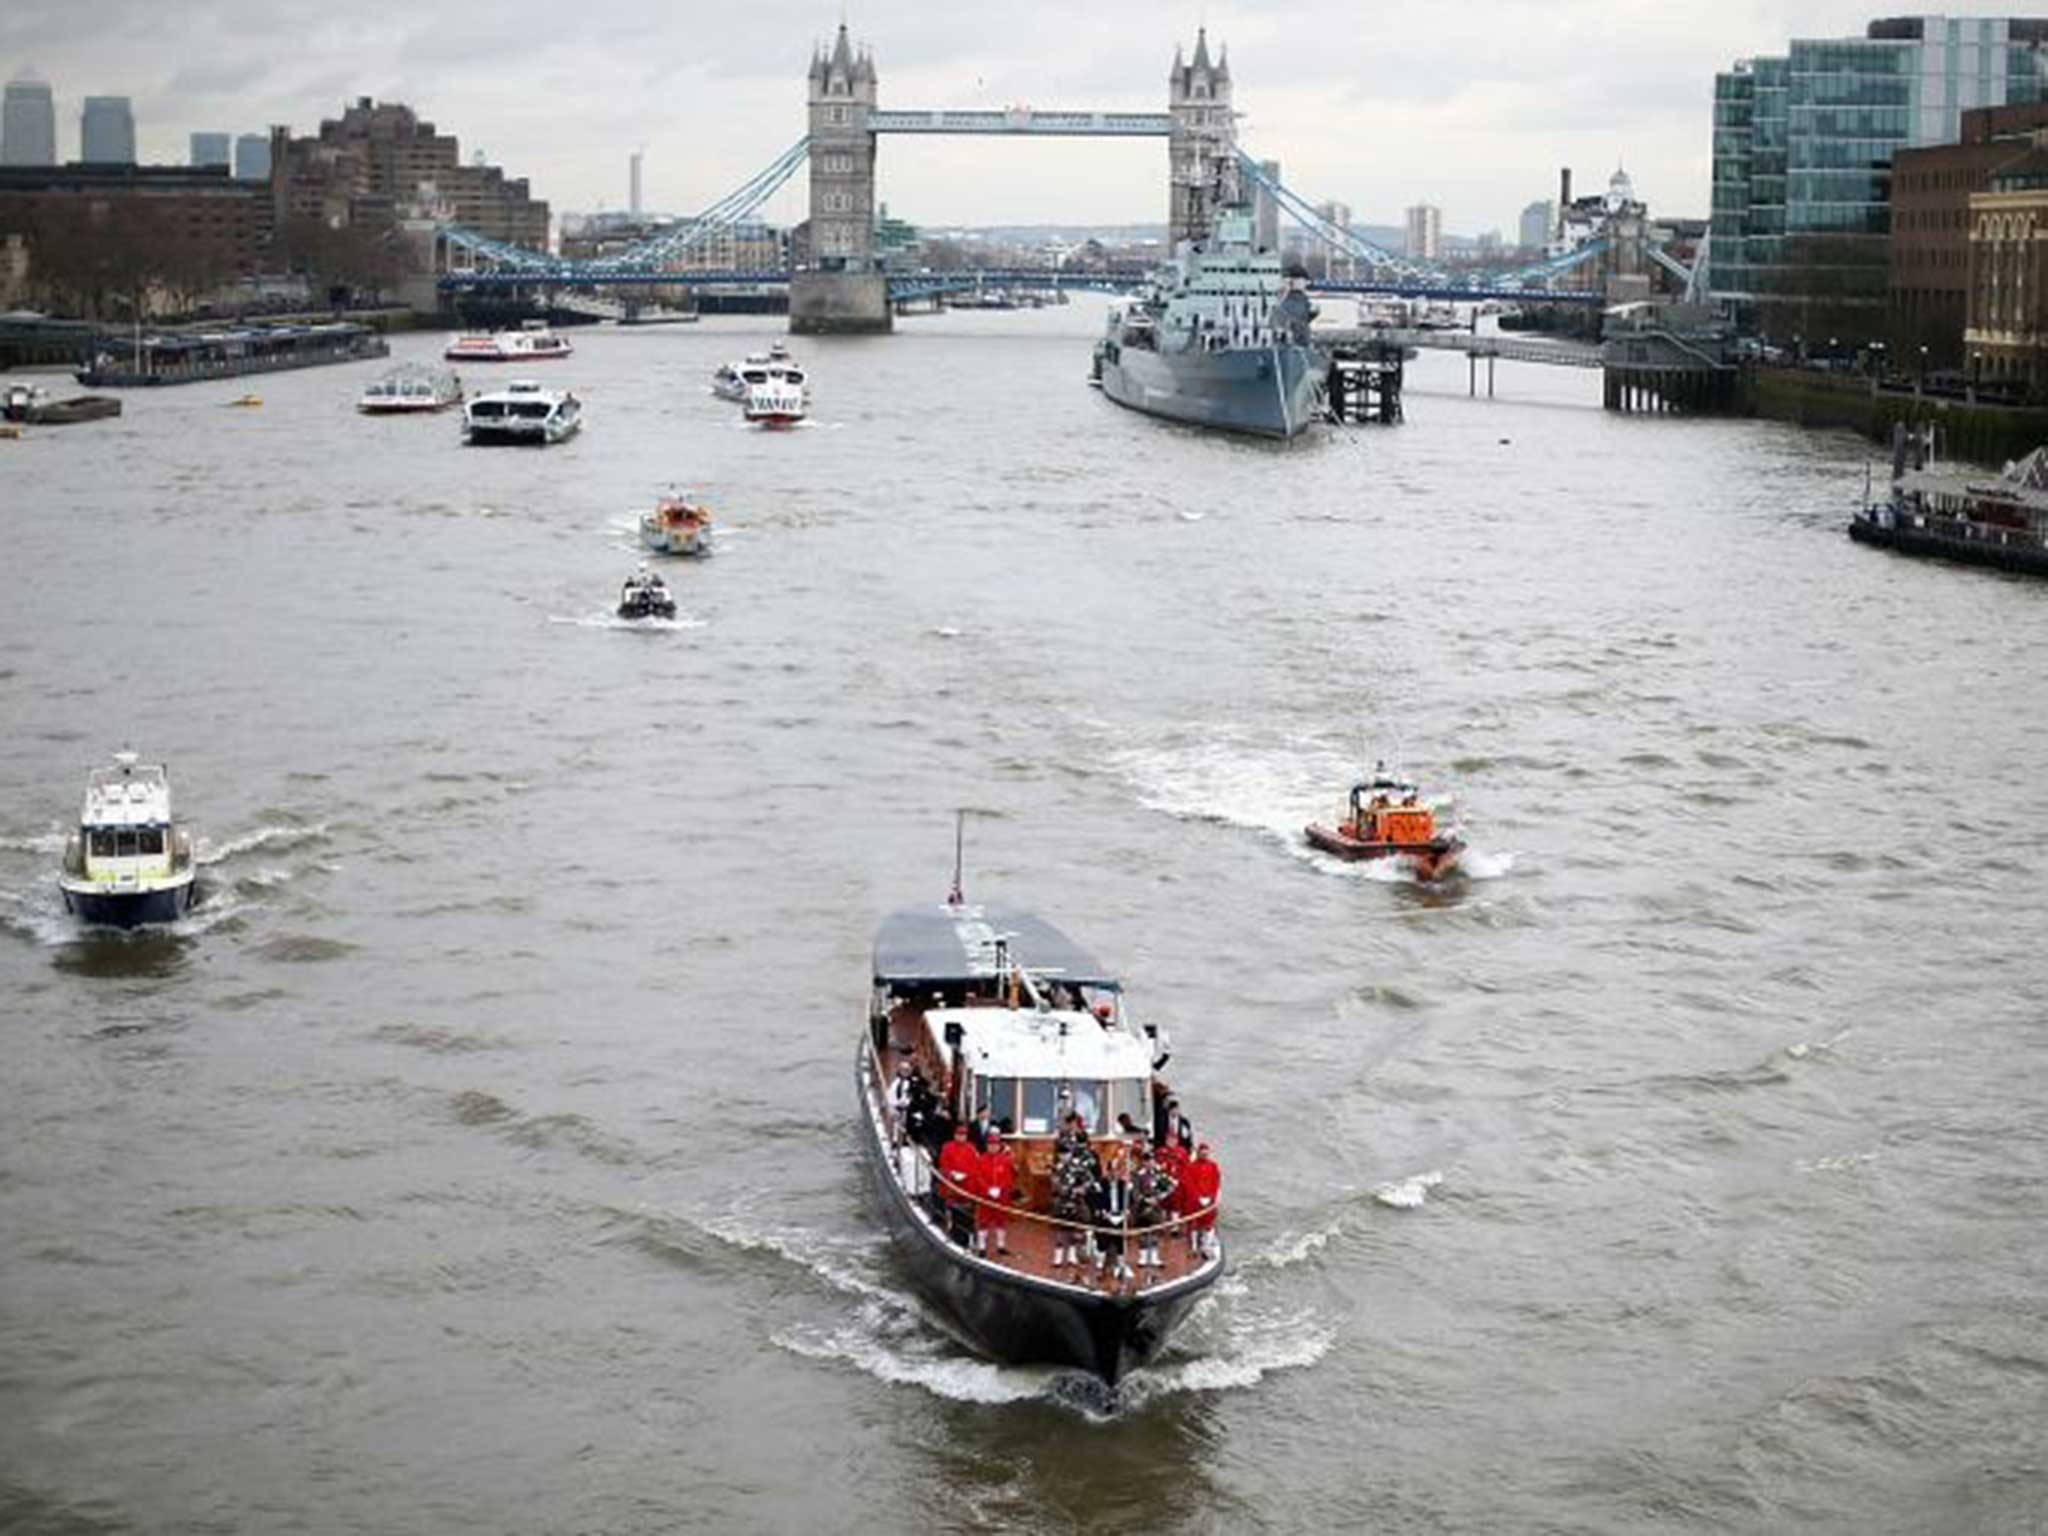 The Havengore travels up the Thames